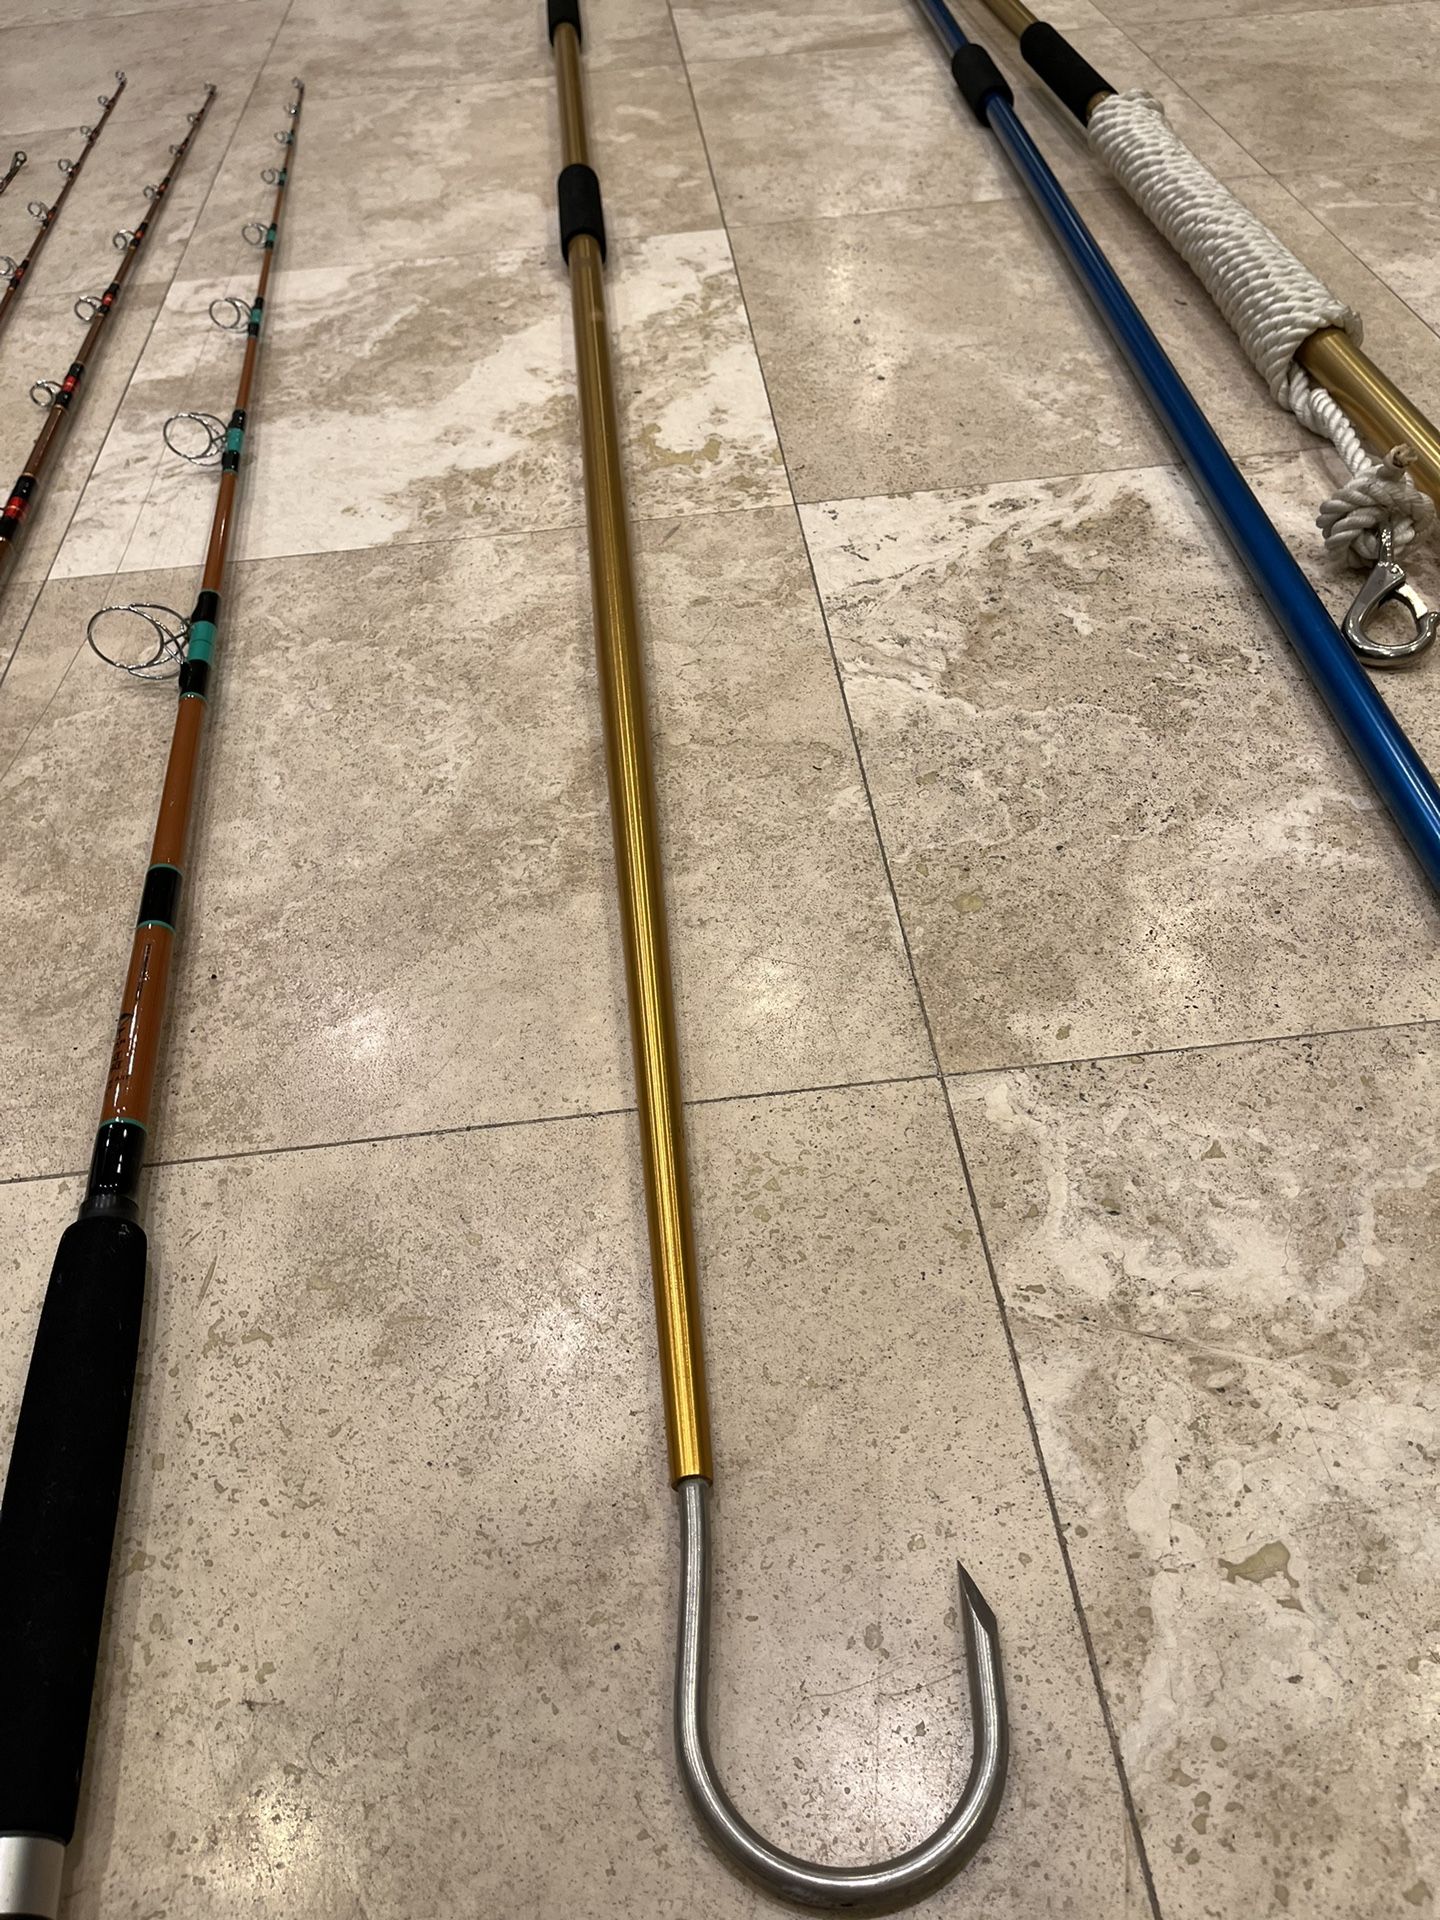 Aftco Fishing Gaff 6' for Sale in Dana Point, CA - OfferUp